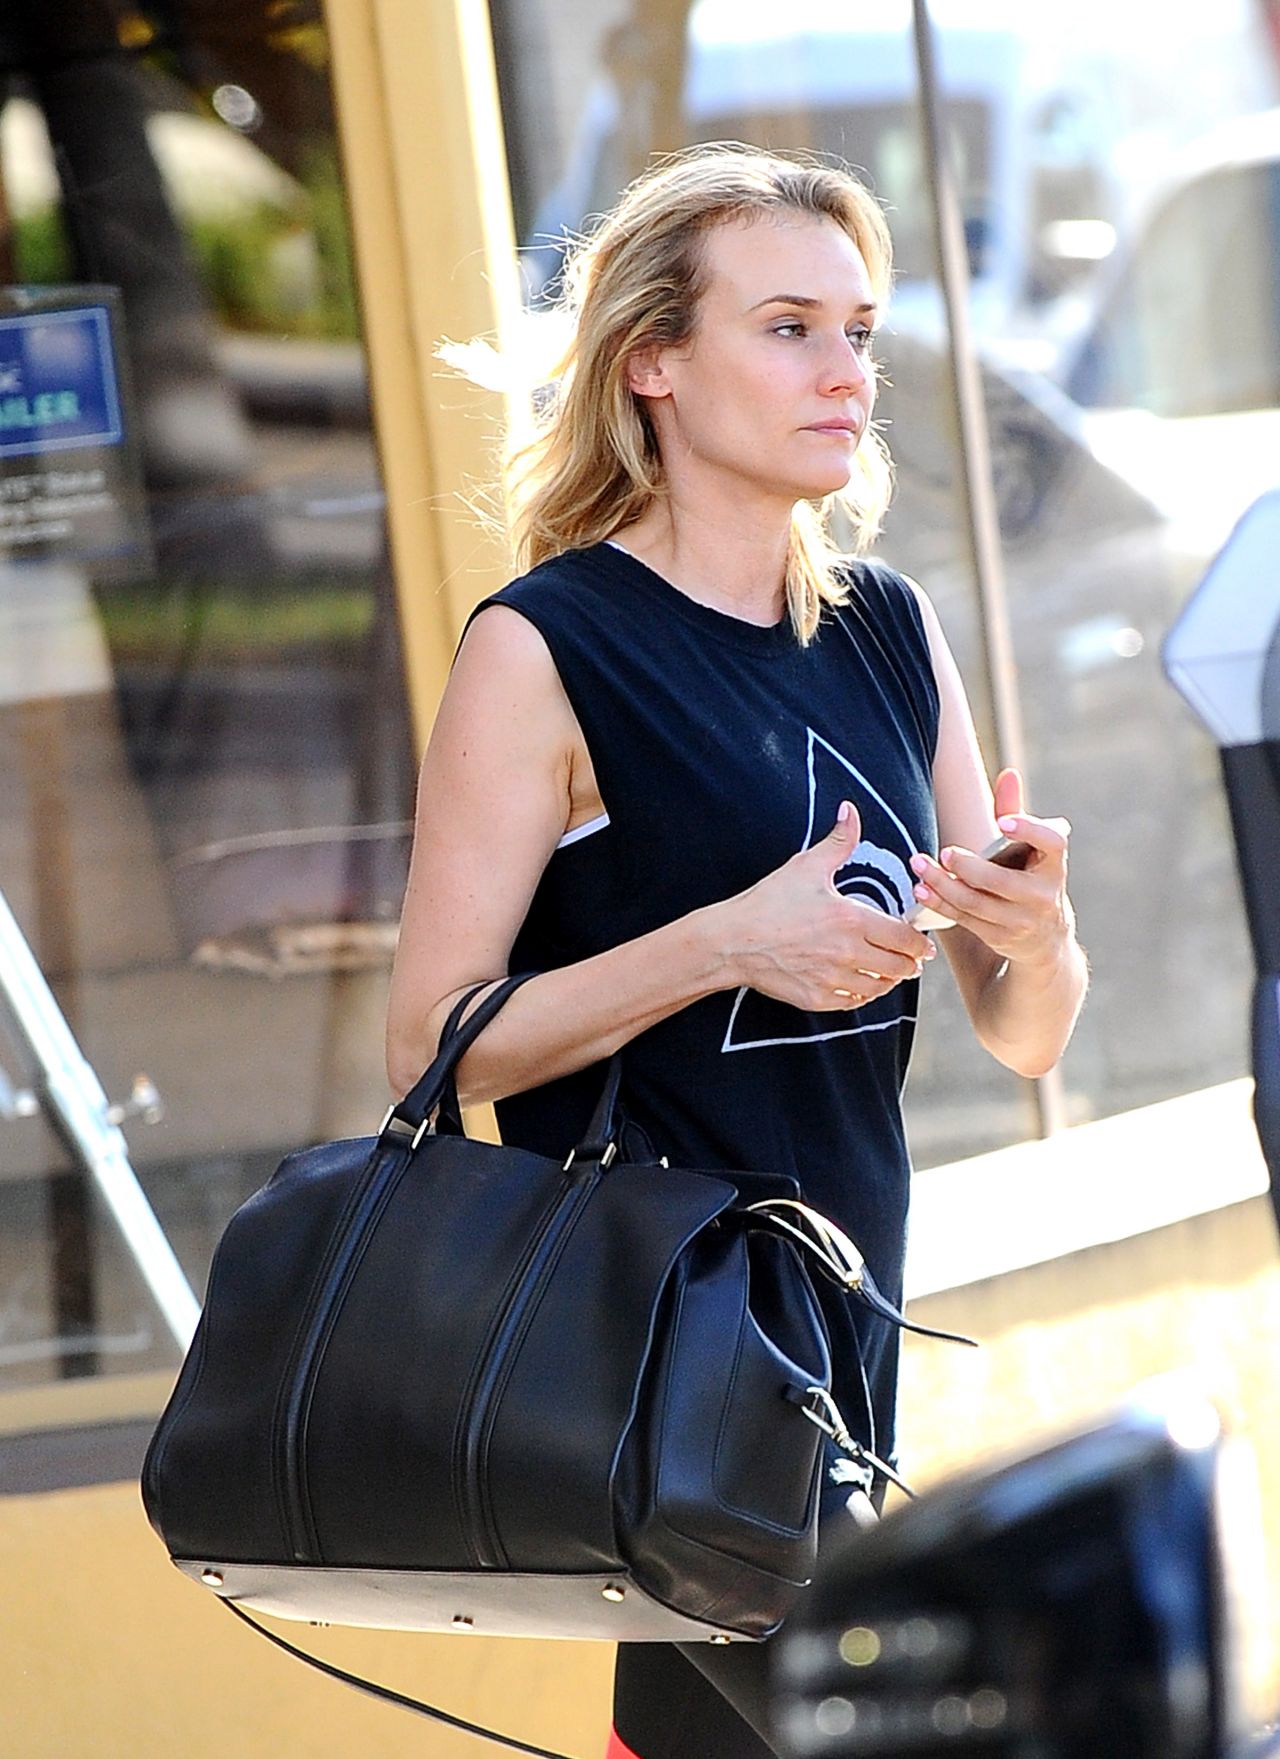 Diane Kruger Leaving the Gym January 24, 2014 – Star Style